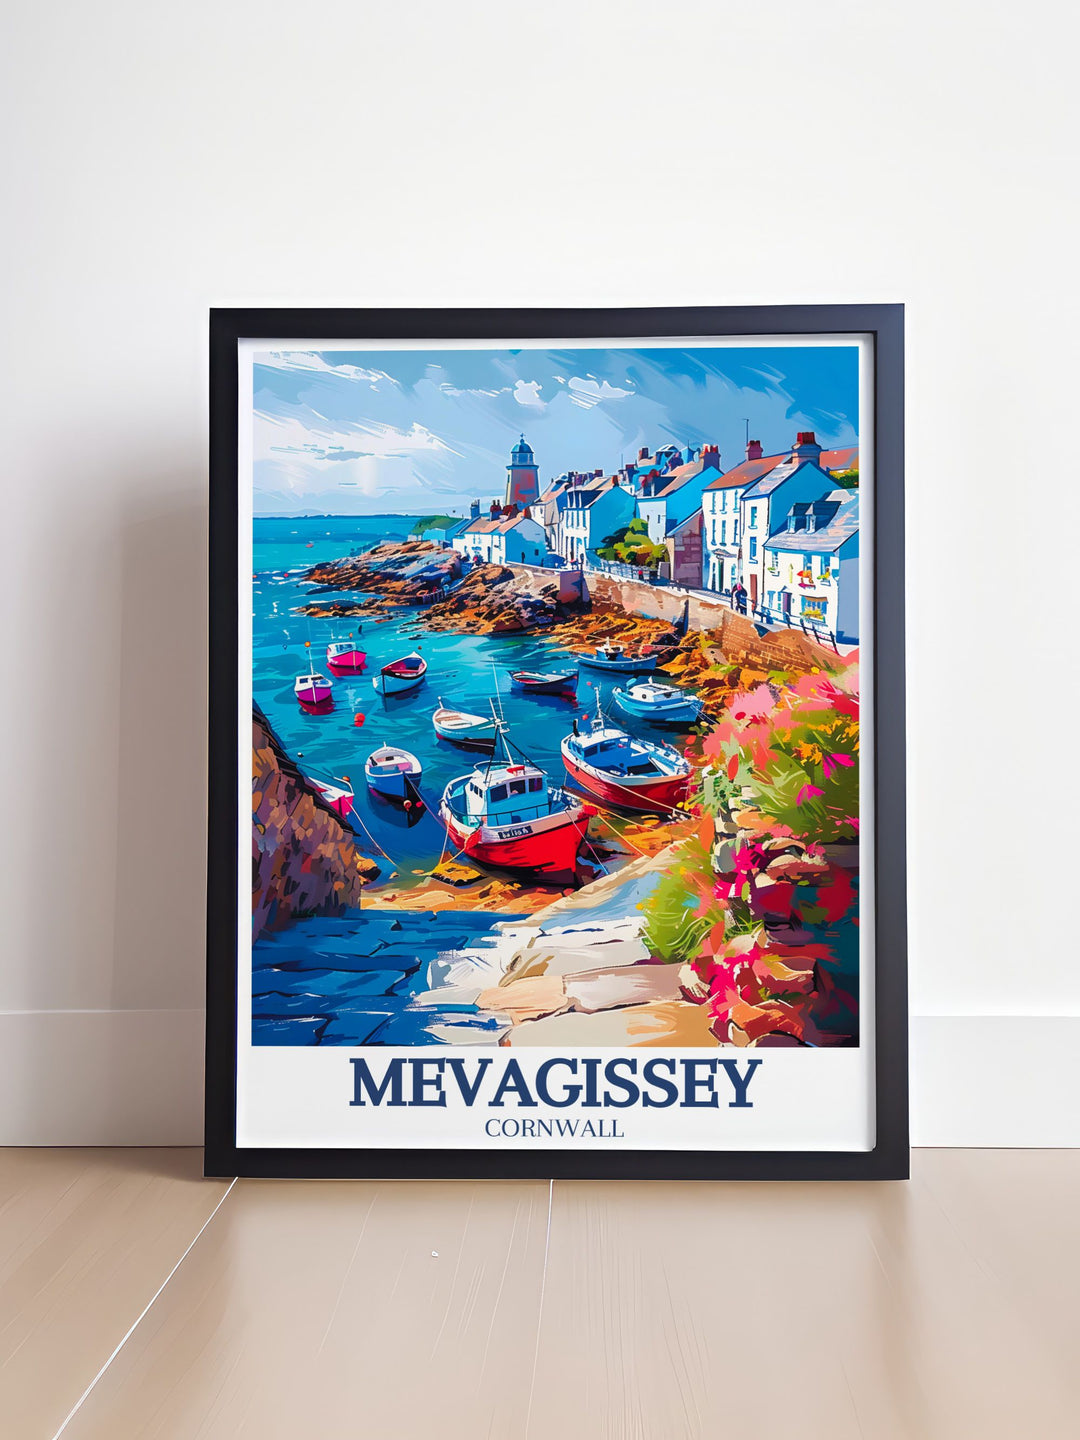 Capturing the picturesque scenery of Mevagissey, this travel poster brings the villages scenic harbor and historical sites into your living space. Ideal for those who love coastal beauty and cultural history, this artwork highlights the essence of Mevagissey.